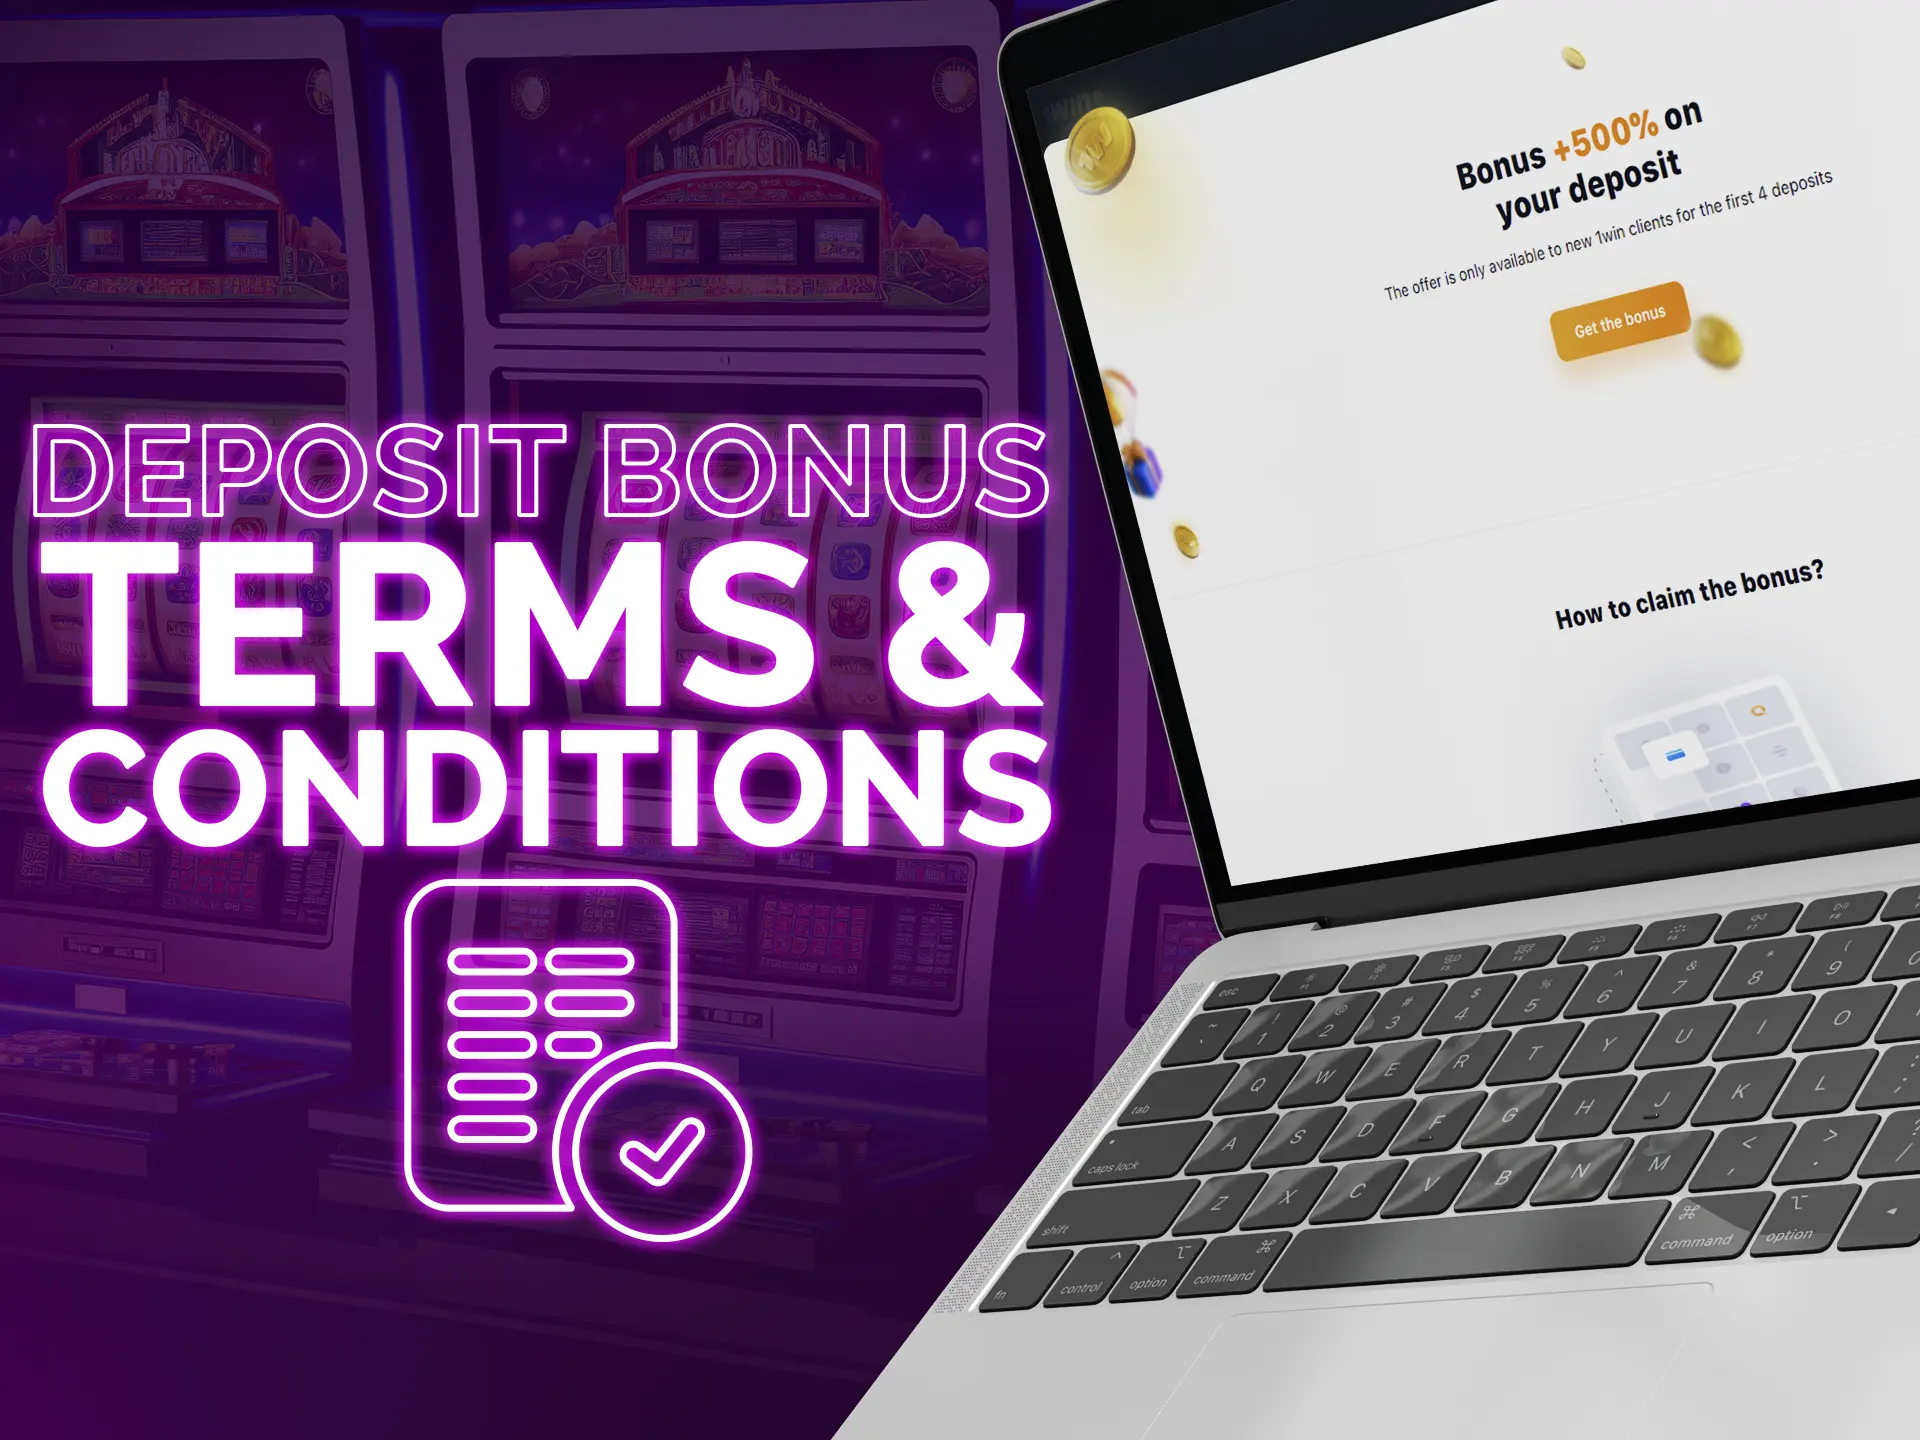 Read terms and conditions and get then your deposit bonus.